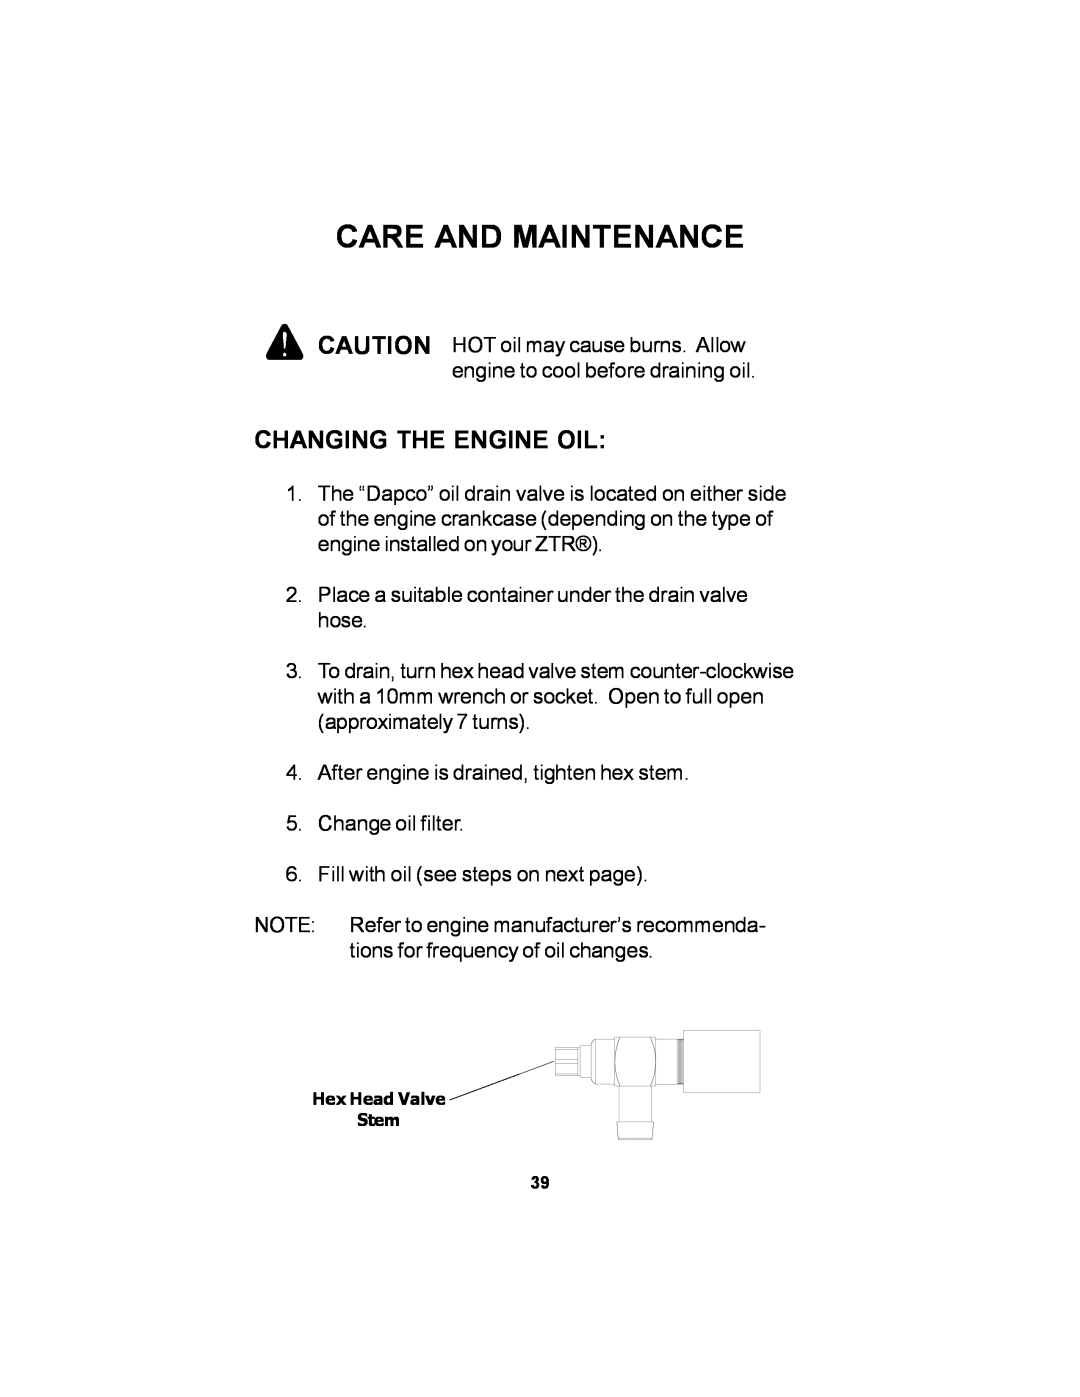 Dixon 11249-106 manual Changing The Engine Oil, Care And Maintenance 